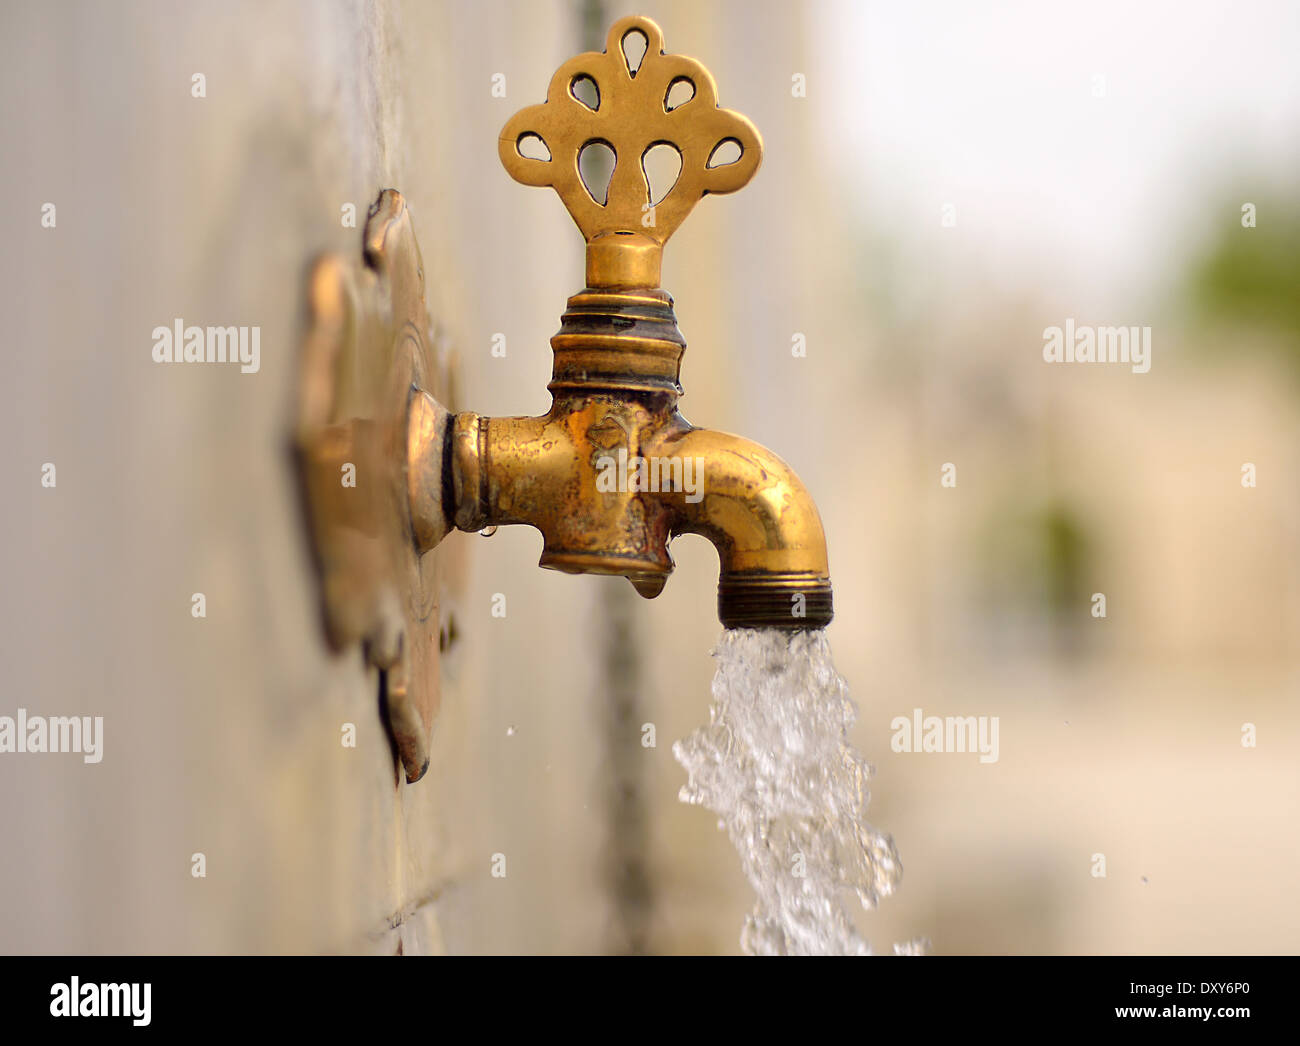 Antique Turkish faucet on wall Stock Photo